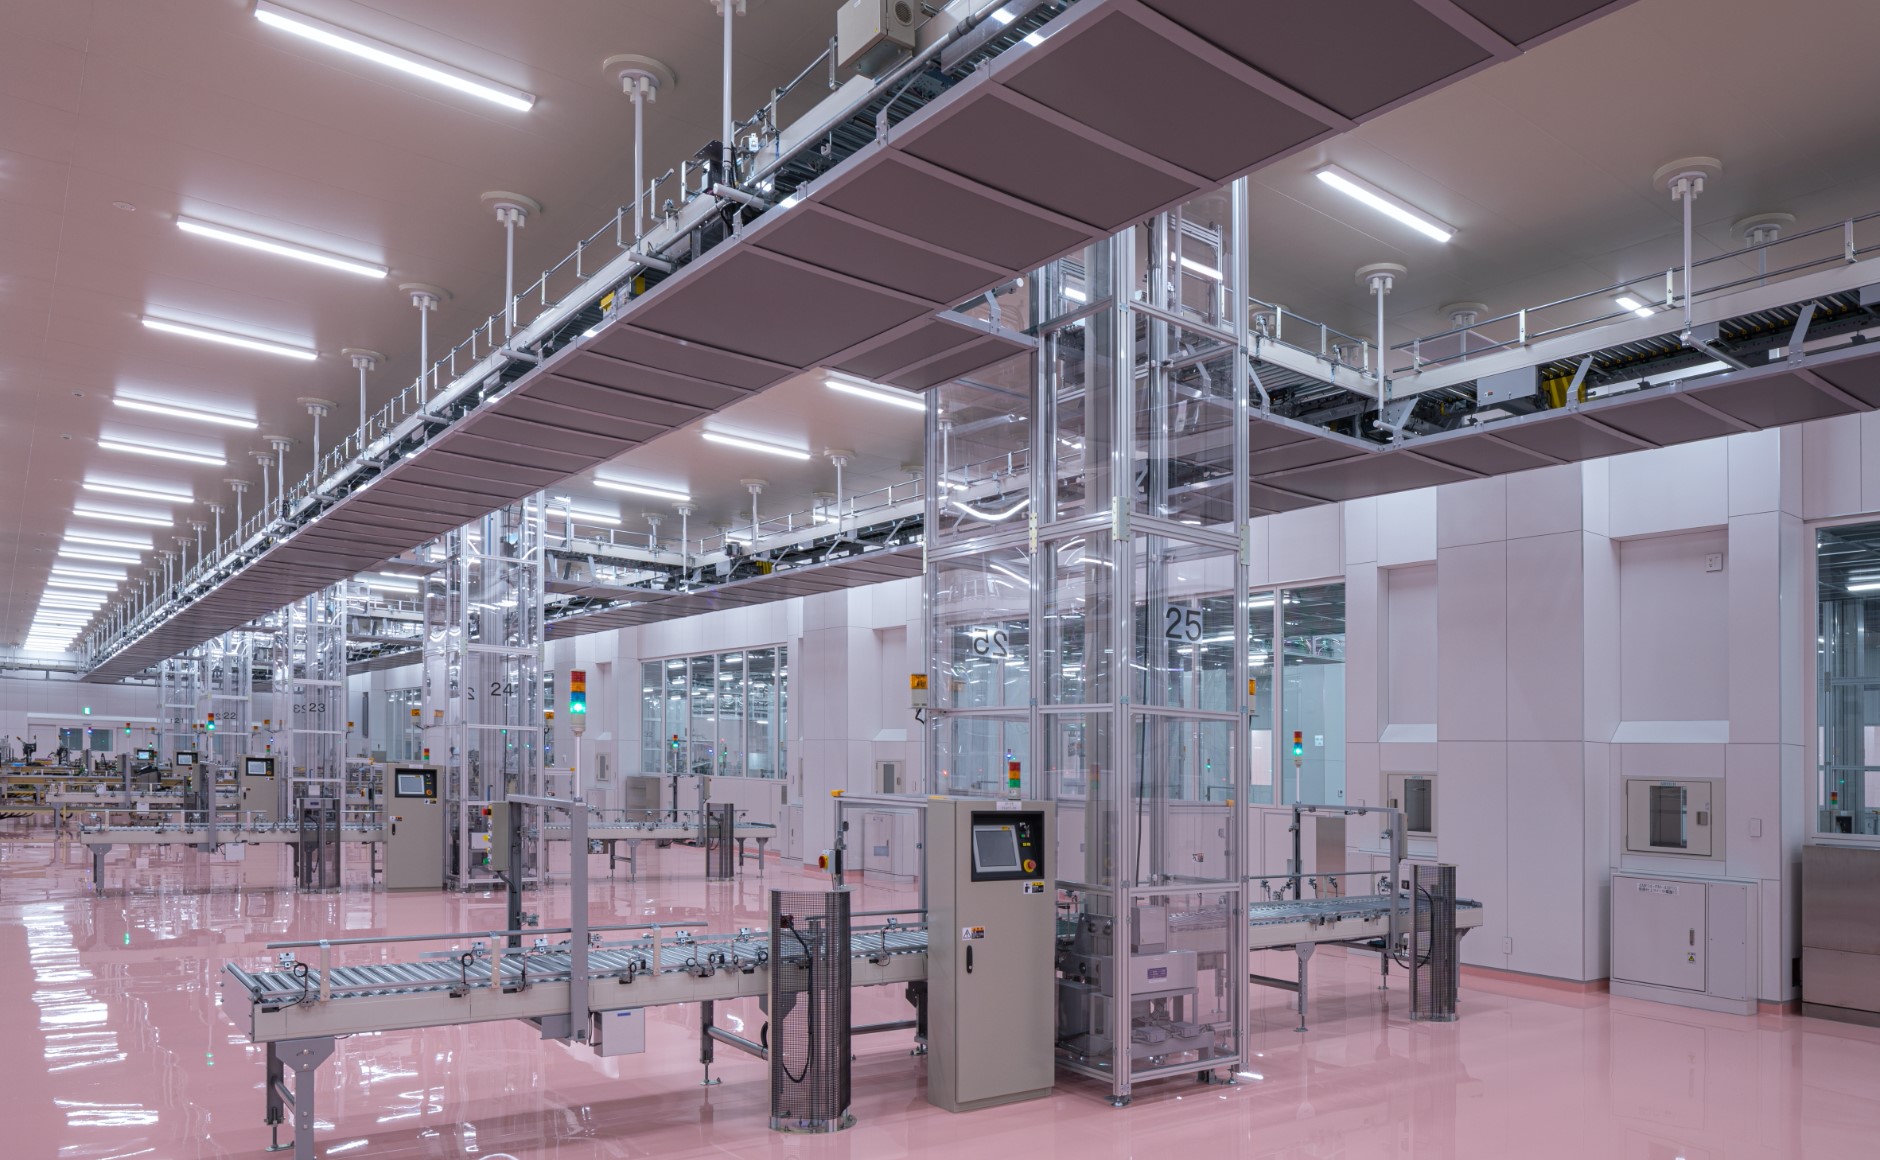 The bottling area on the fourth floor of the factory has a pink floor, creating an aesthetic that befits cosmetic producer. Visitors can observe from the other side of the windows.